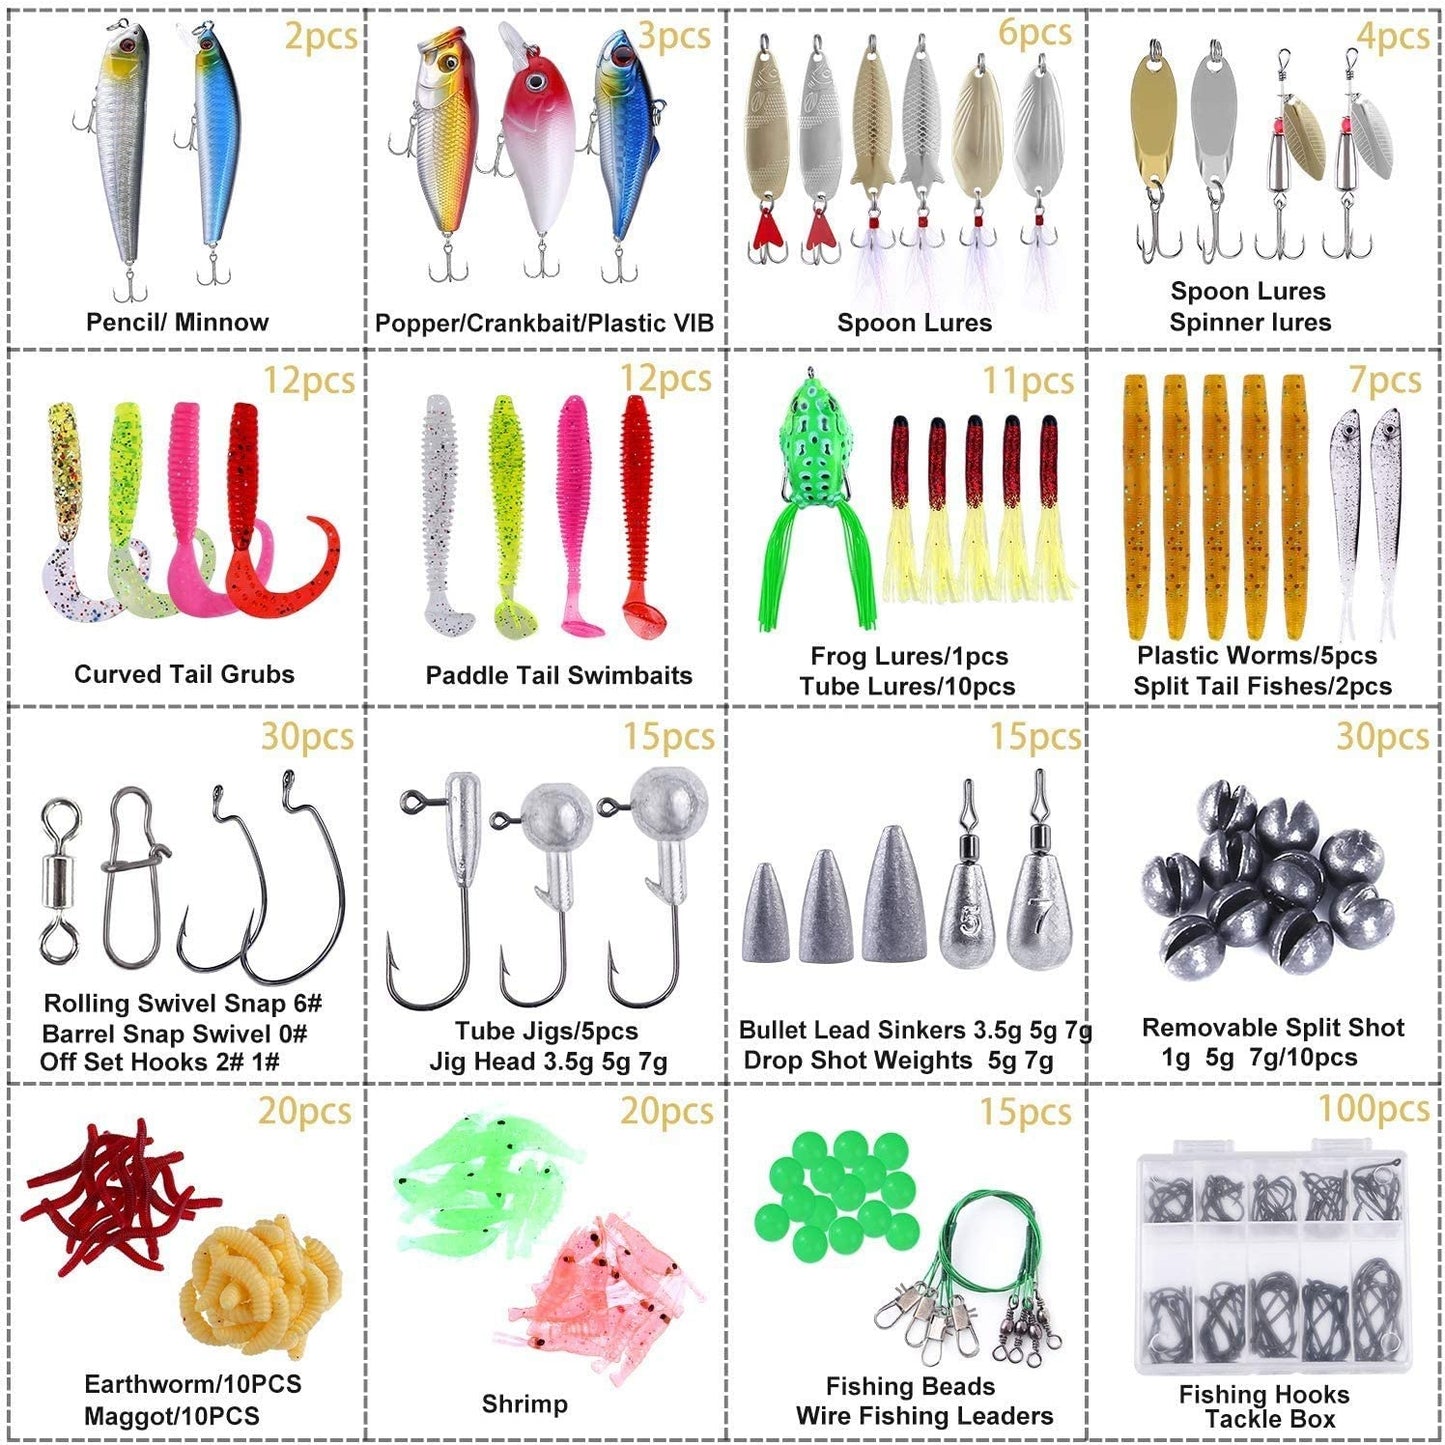 A collage of 16 images. The images show all the various different lures and baits that are included with the 320 fishing lure tackle box.